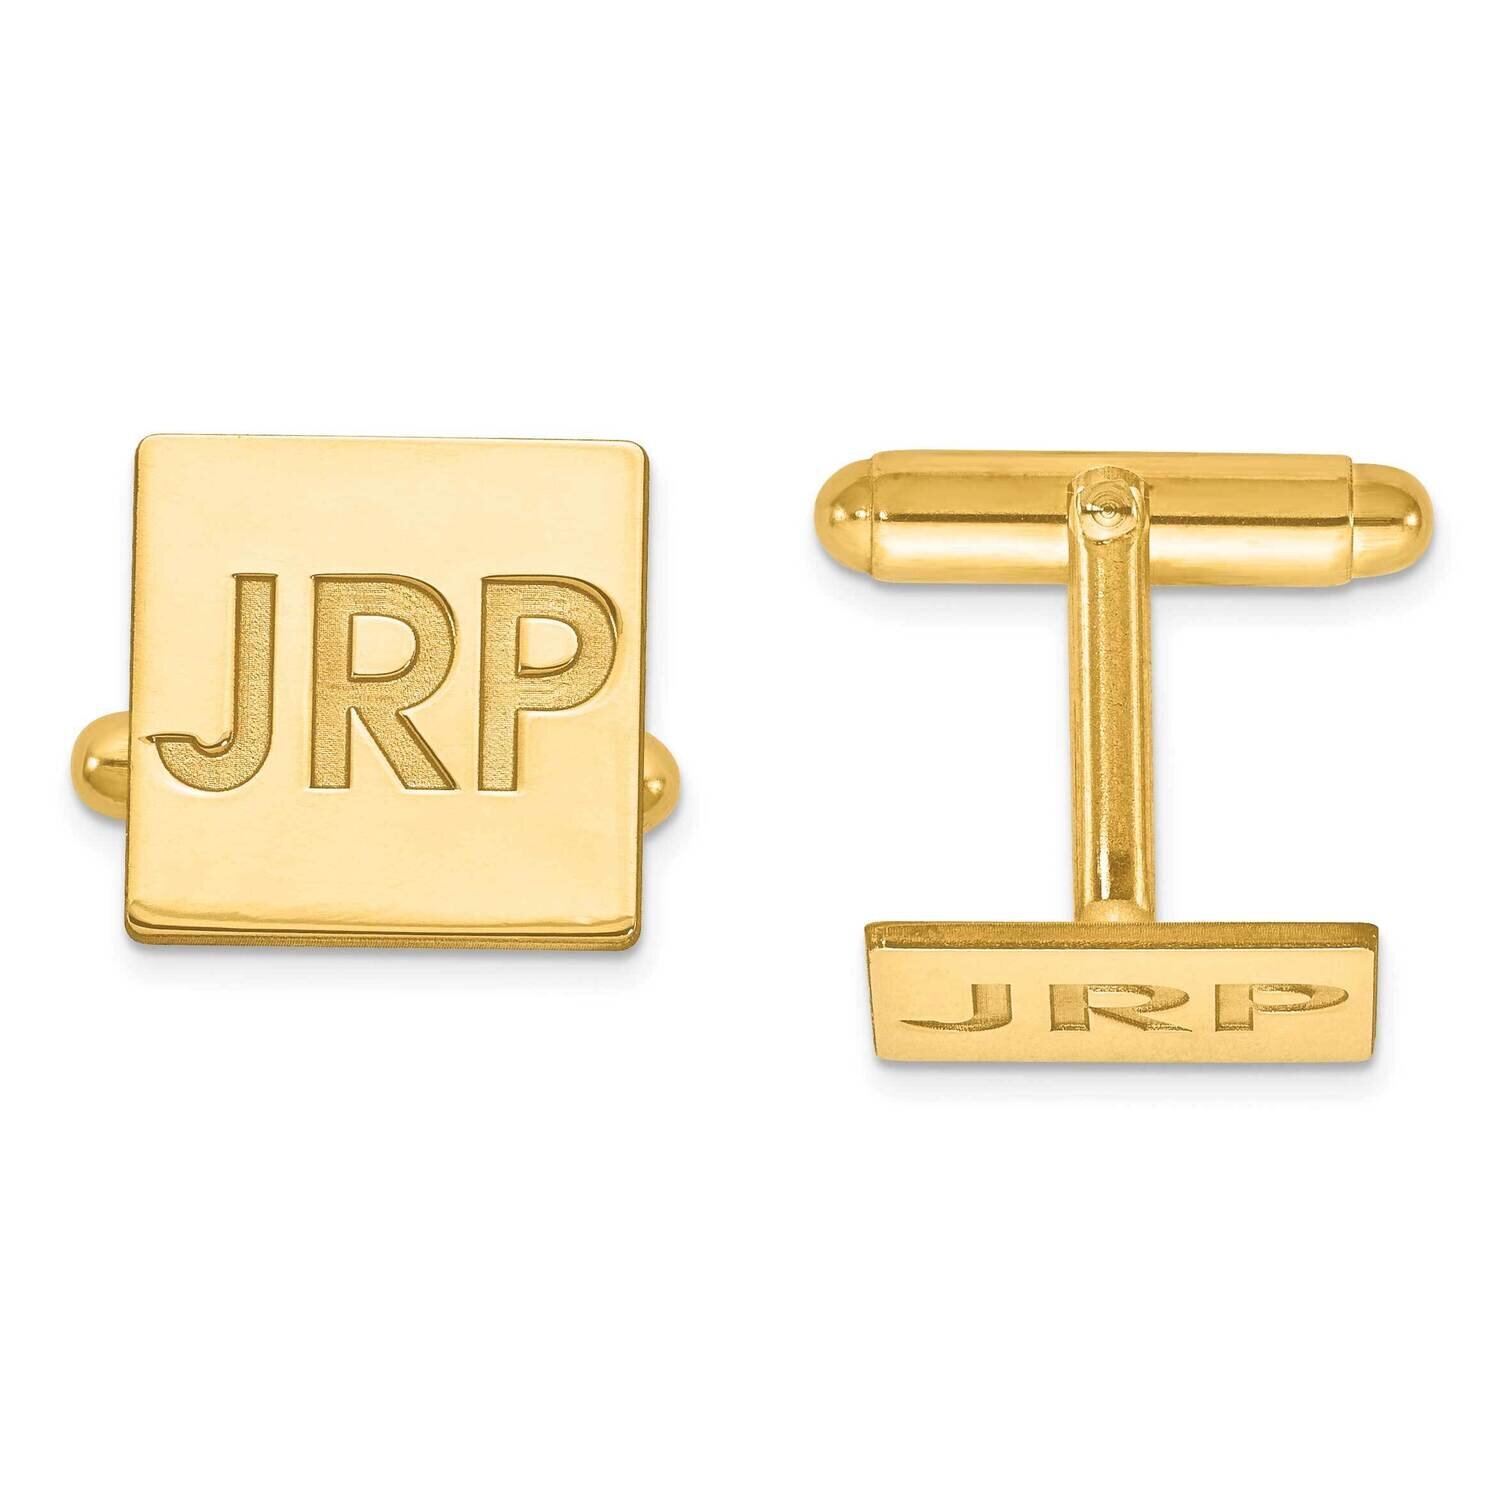 Recessed Letters Square Monogram Cuff Links Gold-plated Silver XNA611GP